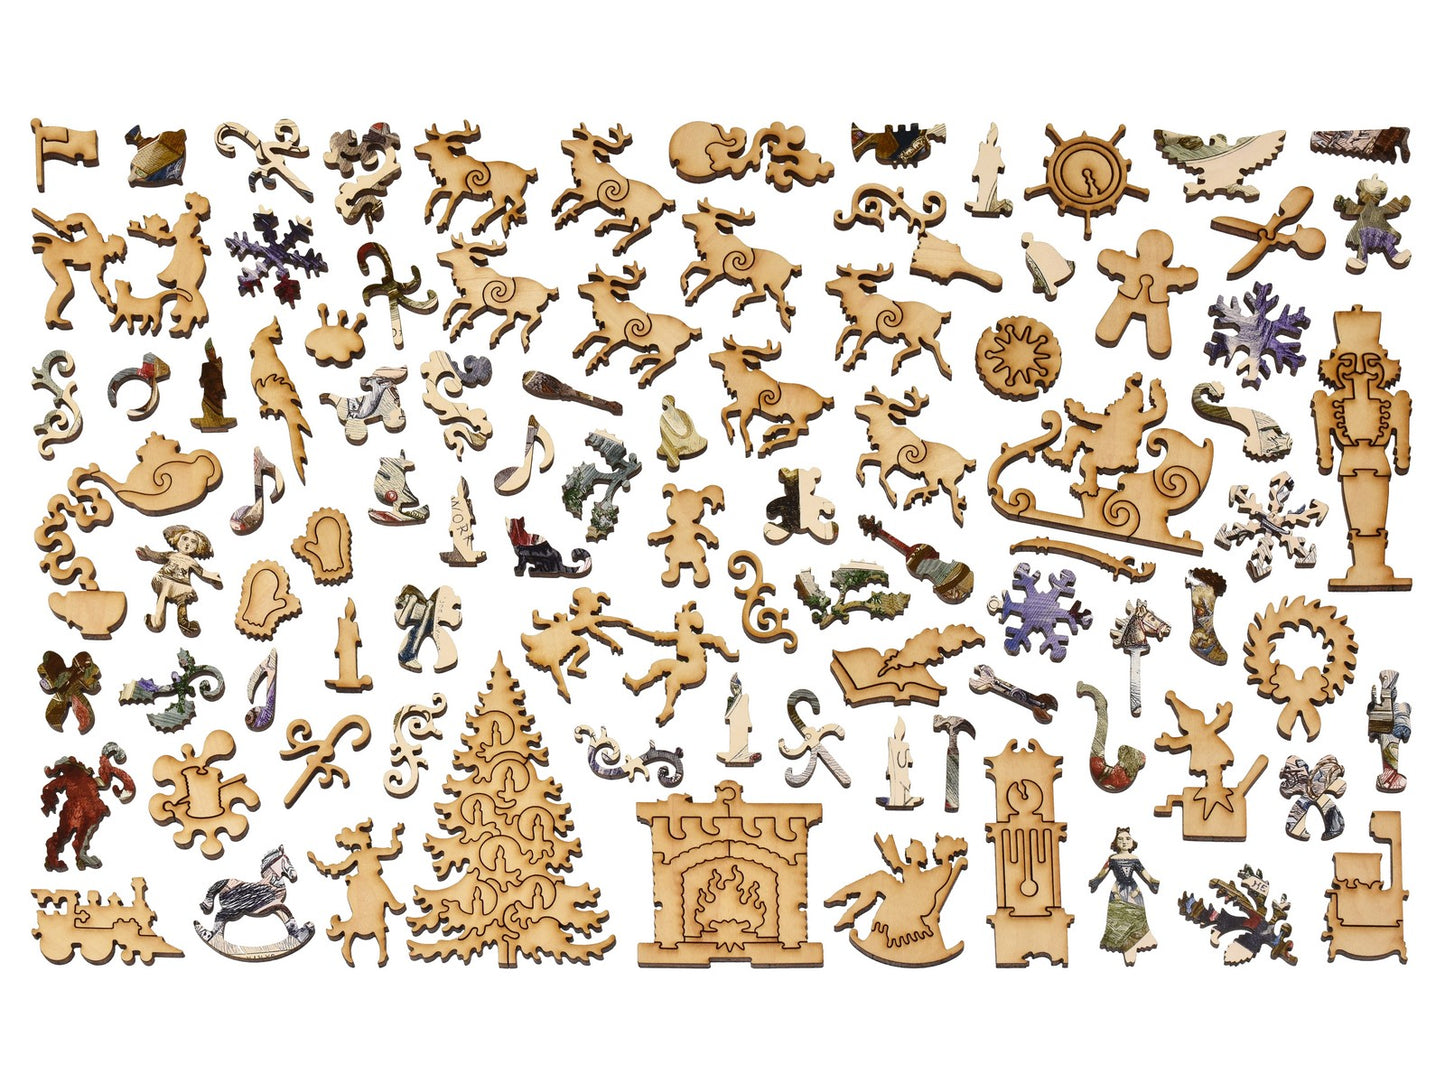 The whimsy pieces that can be found in the puzzle, Santa Claus and His Works.